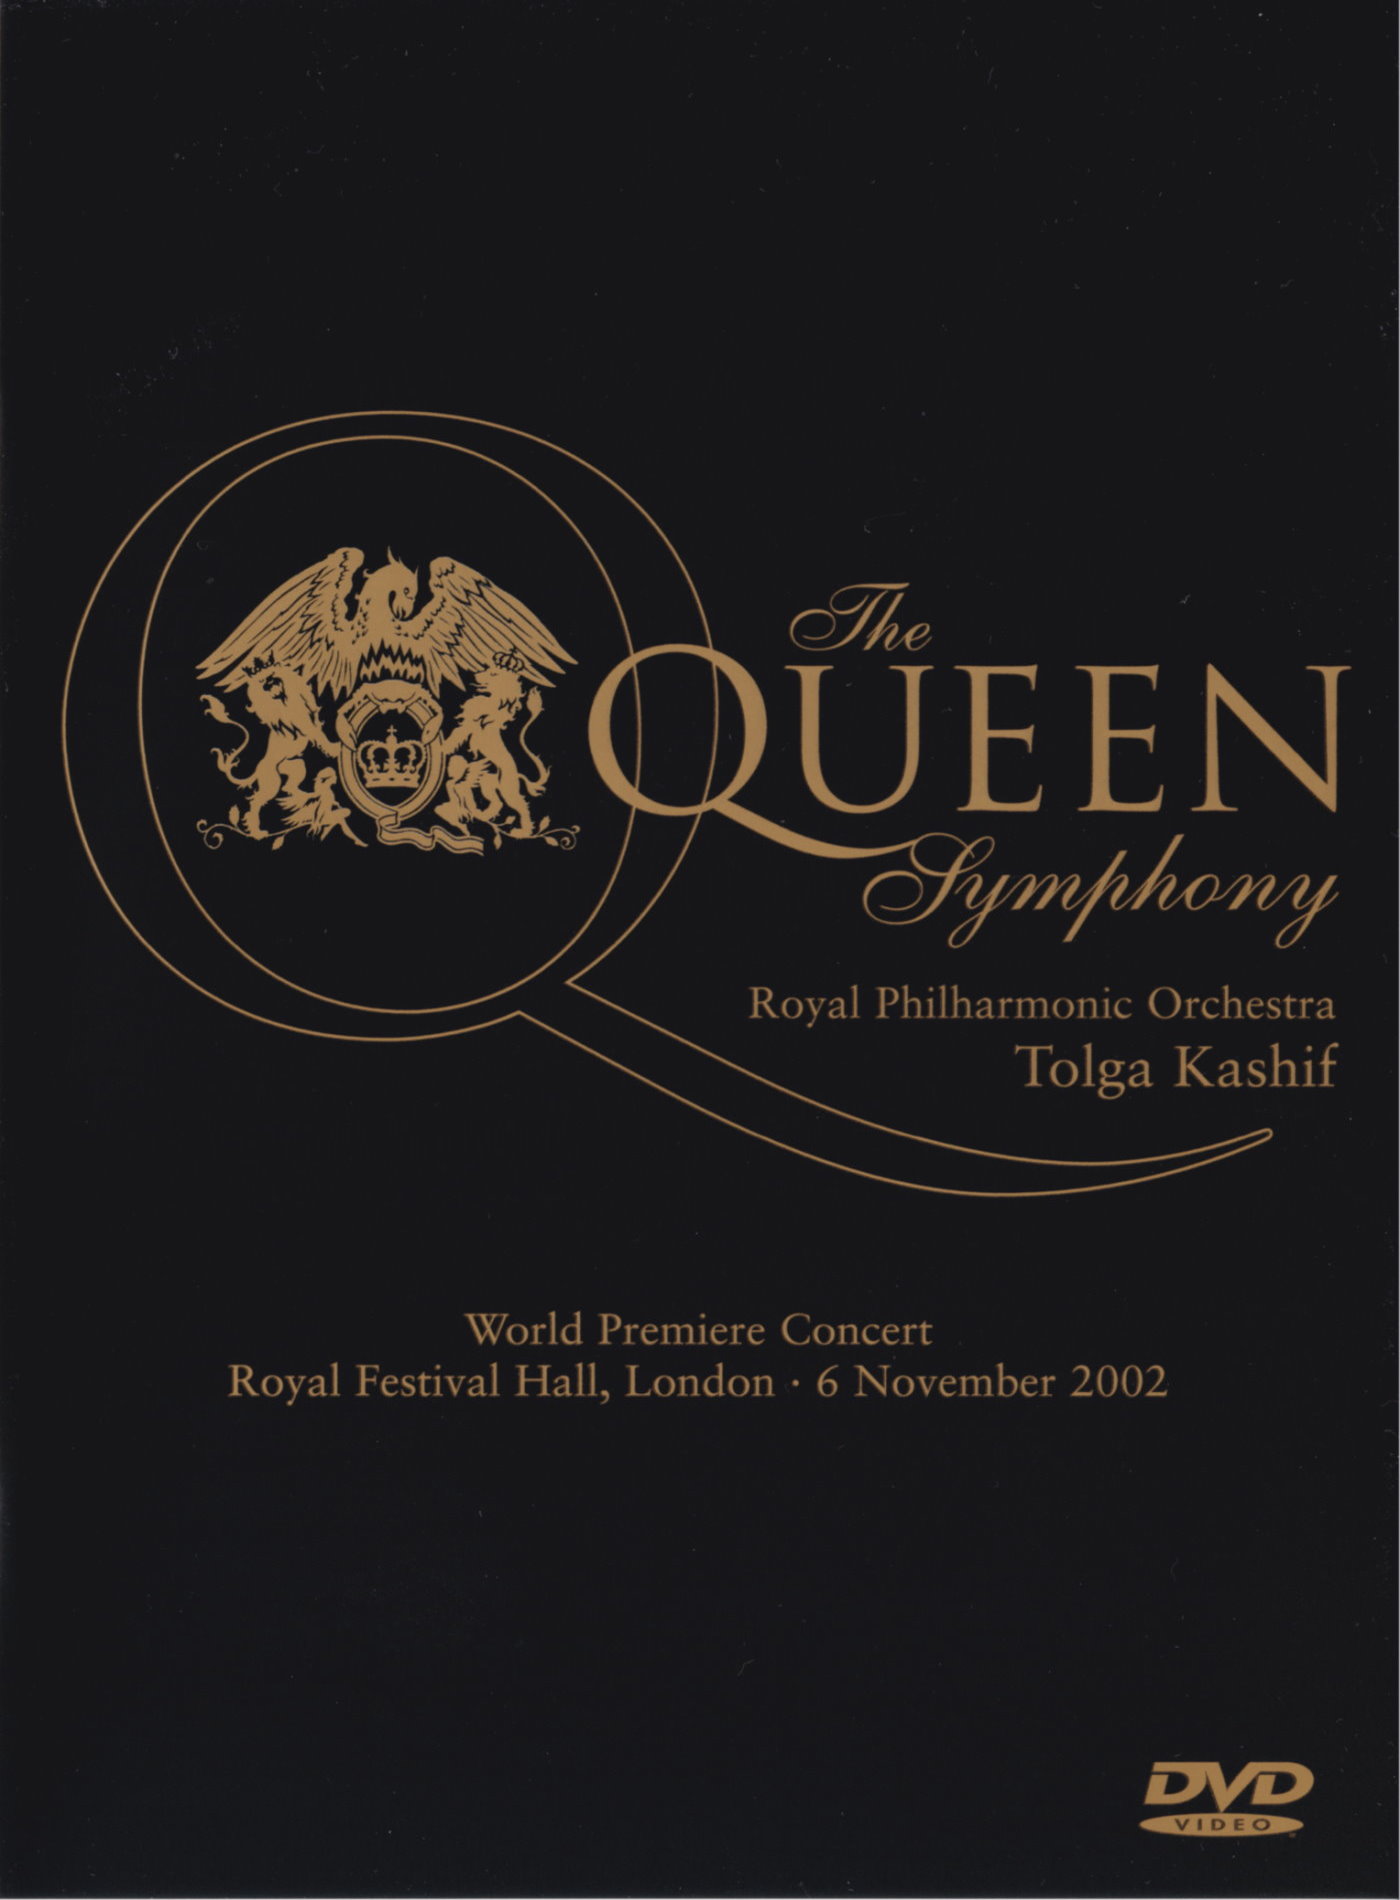 Cover - The Queen Symphony.jpg